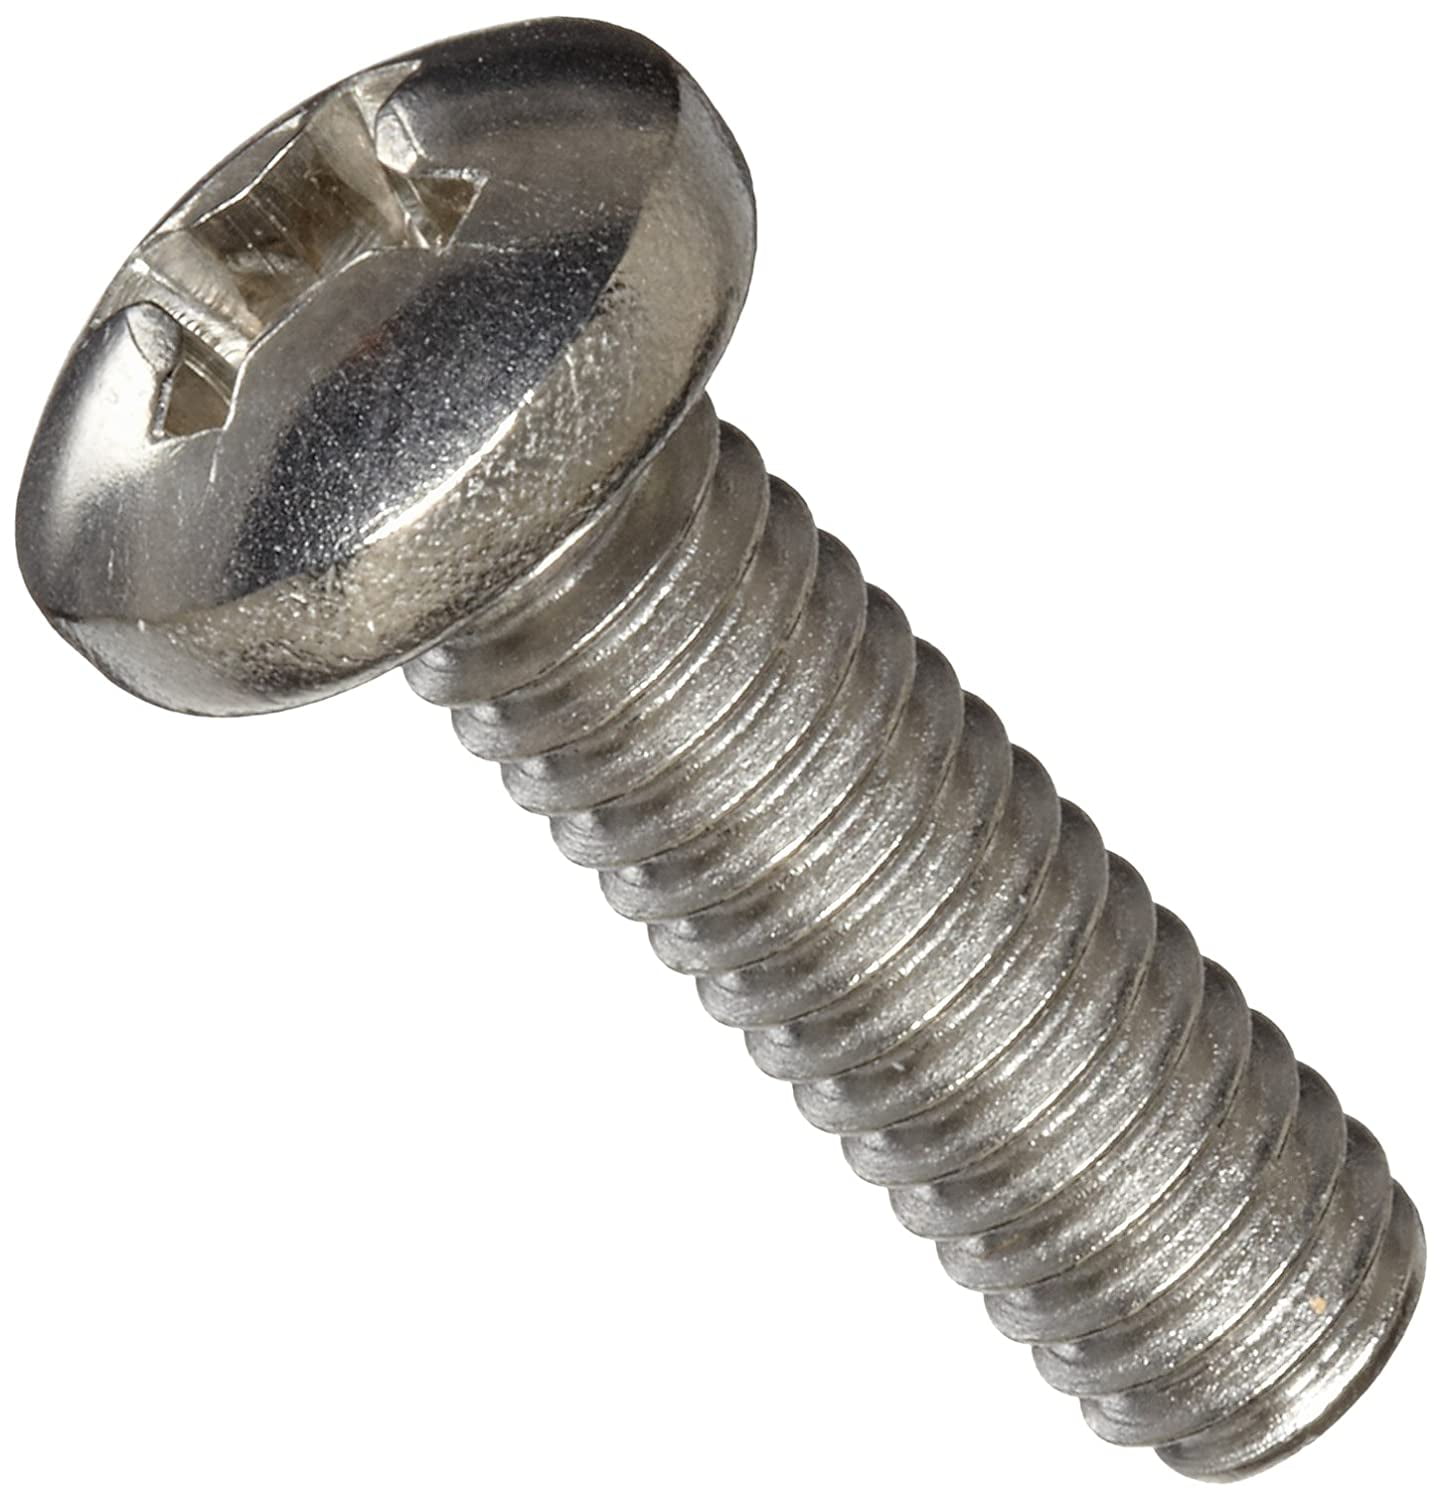 Meets ASME B18.6.3 #10-24 UNC Threads 5/8 Length Slotted Drive Zinc Plated Finish Pack of 100 Fully Threaded Pan Head Steel Machine Screw